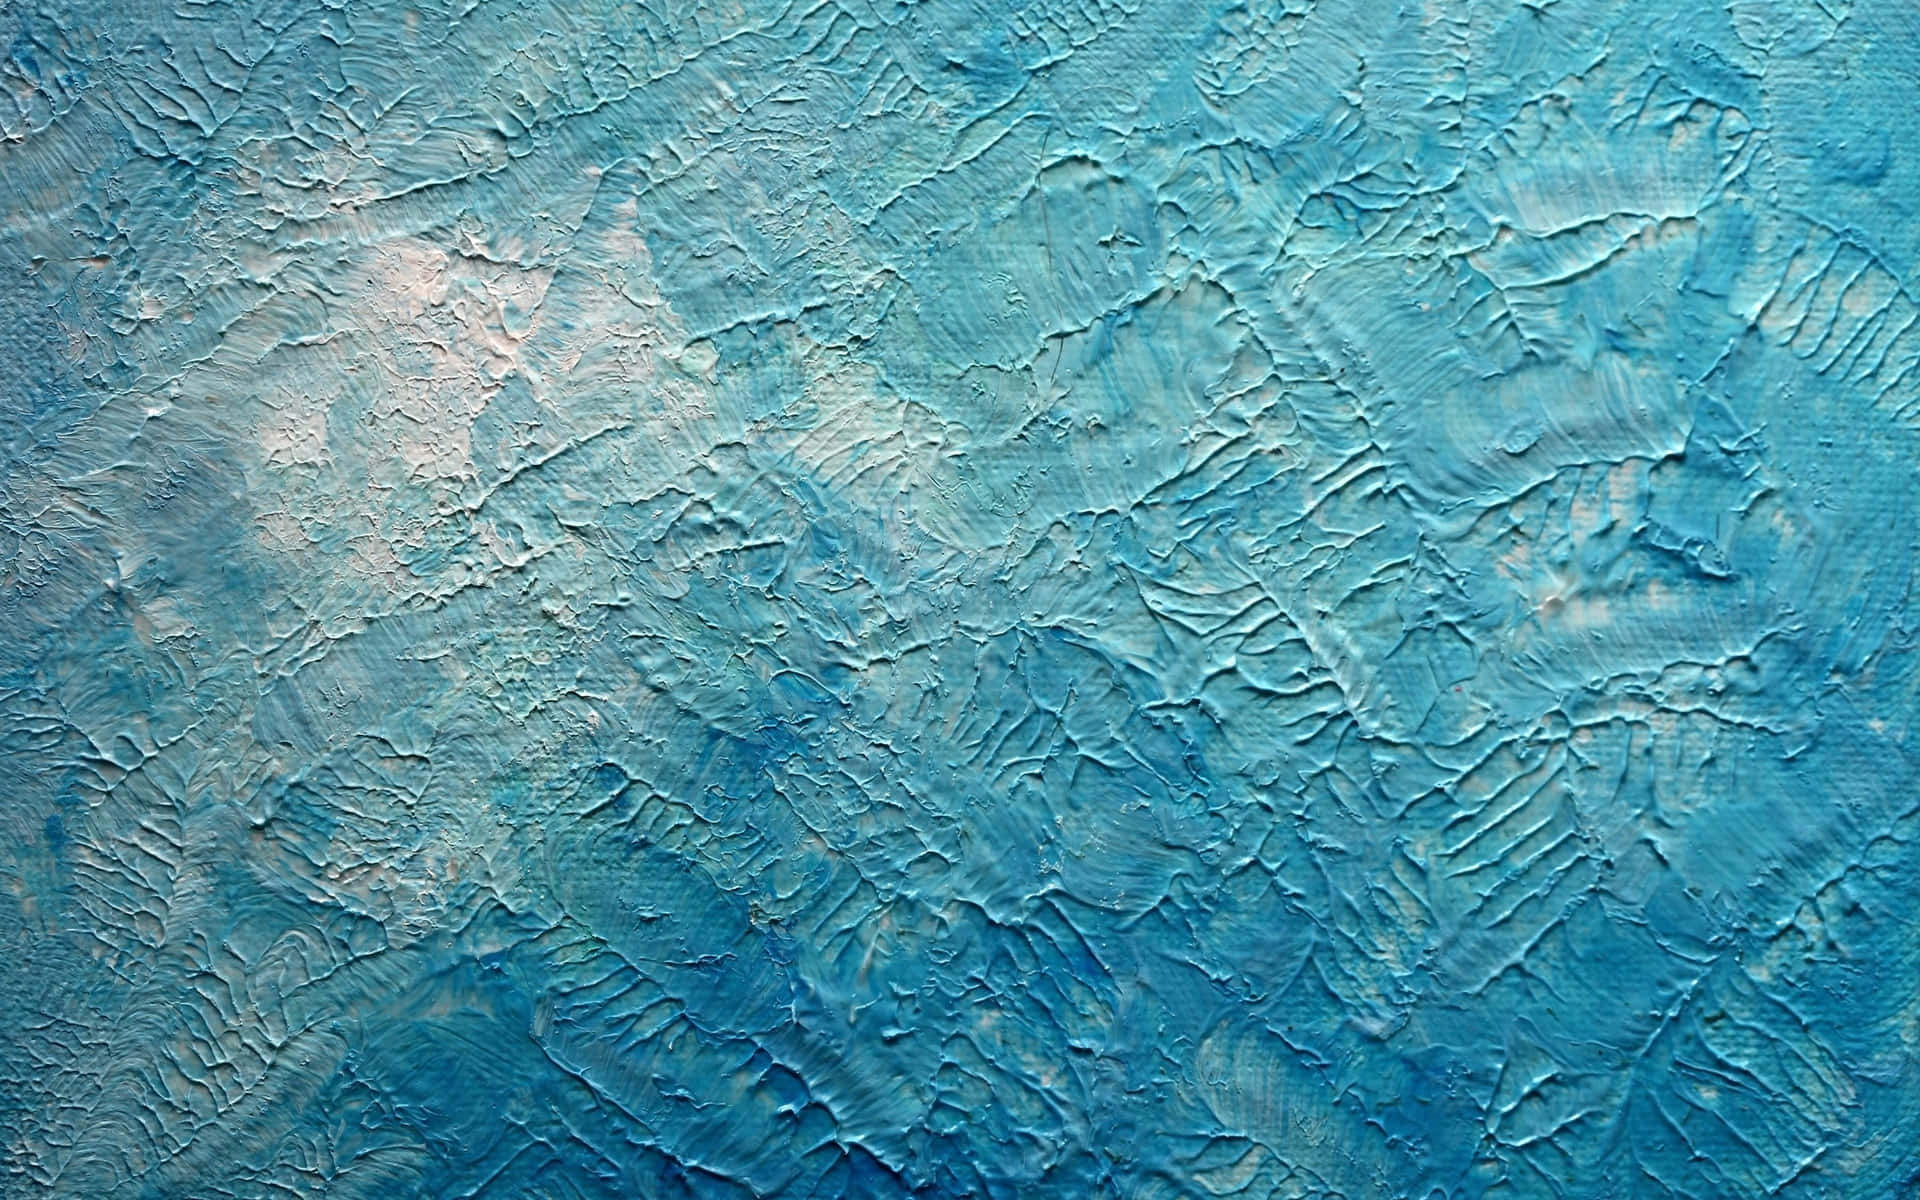 a painting of a blue and white painting